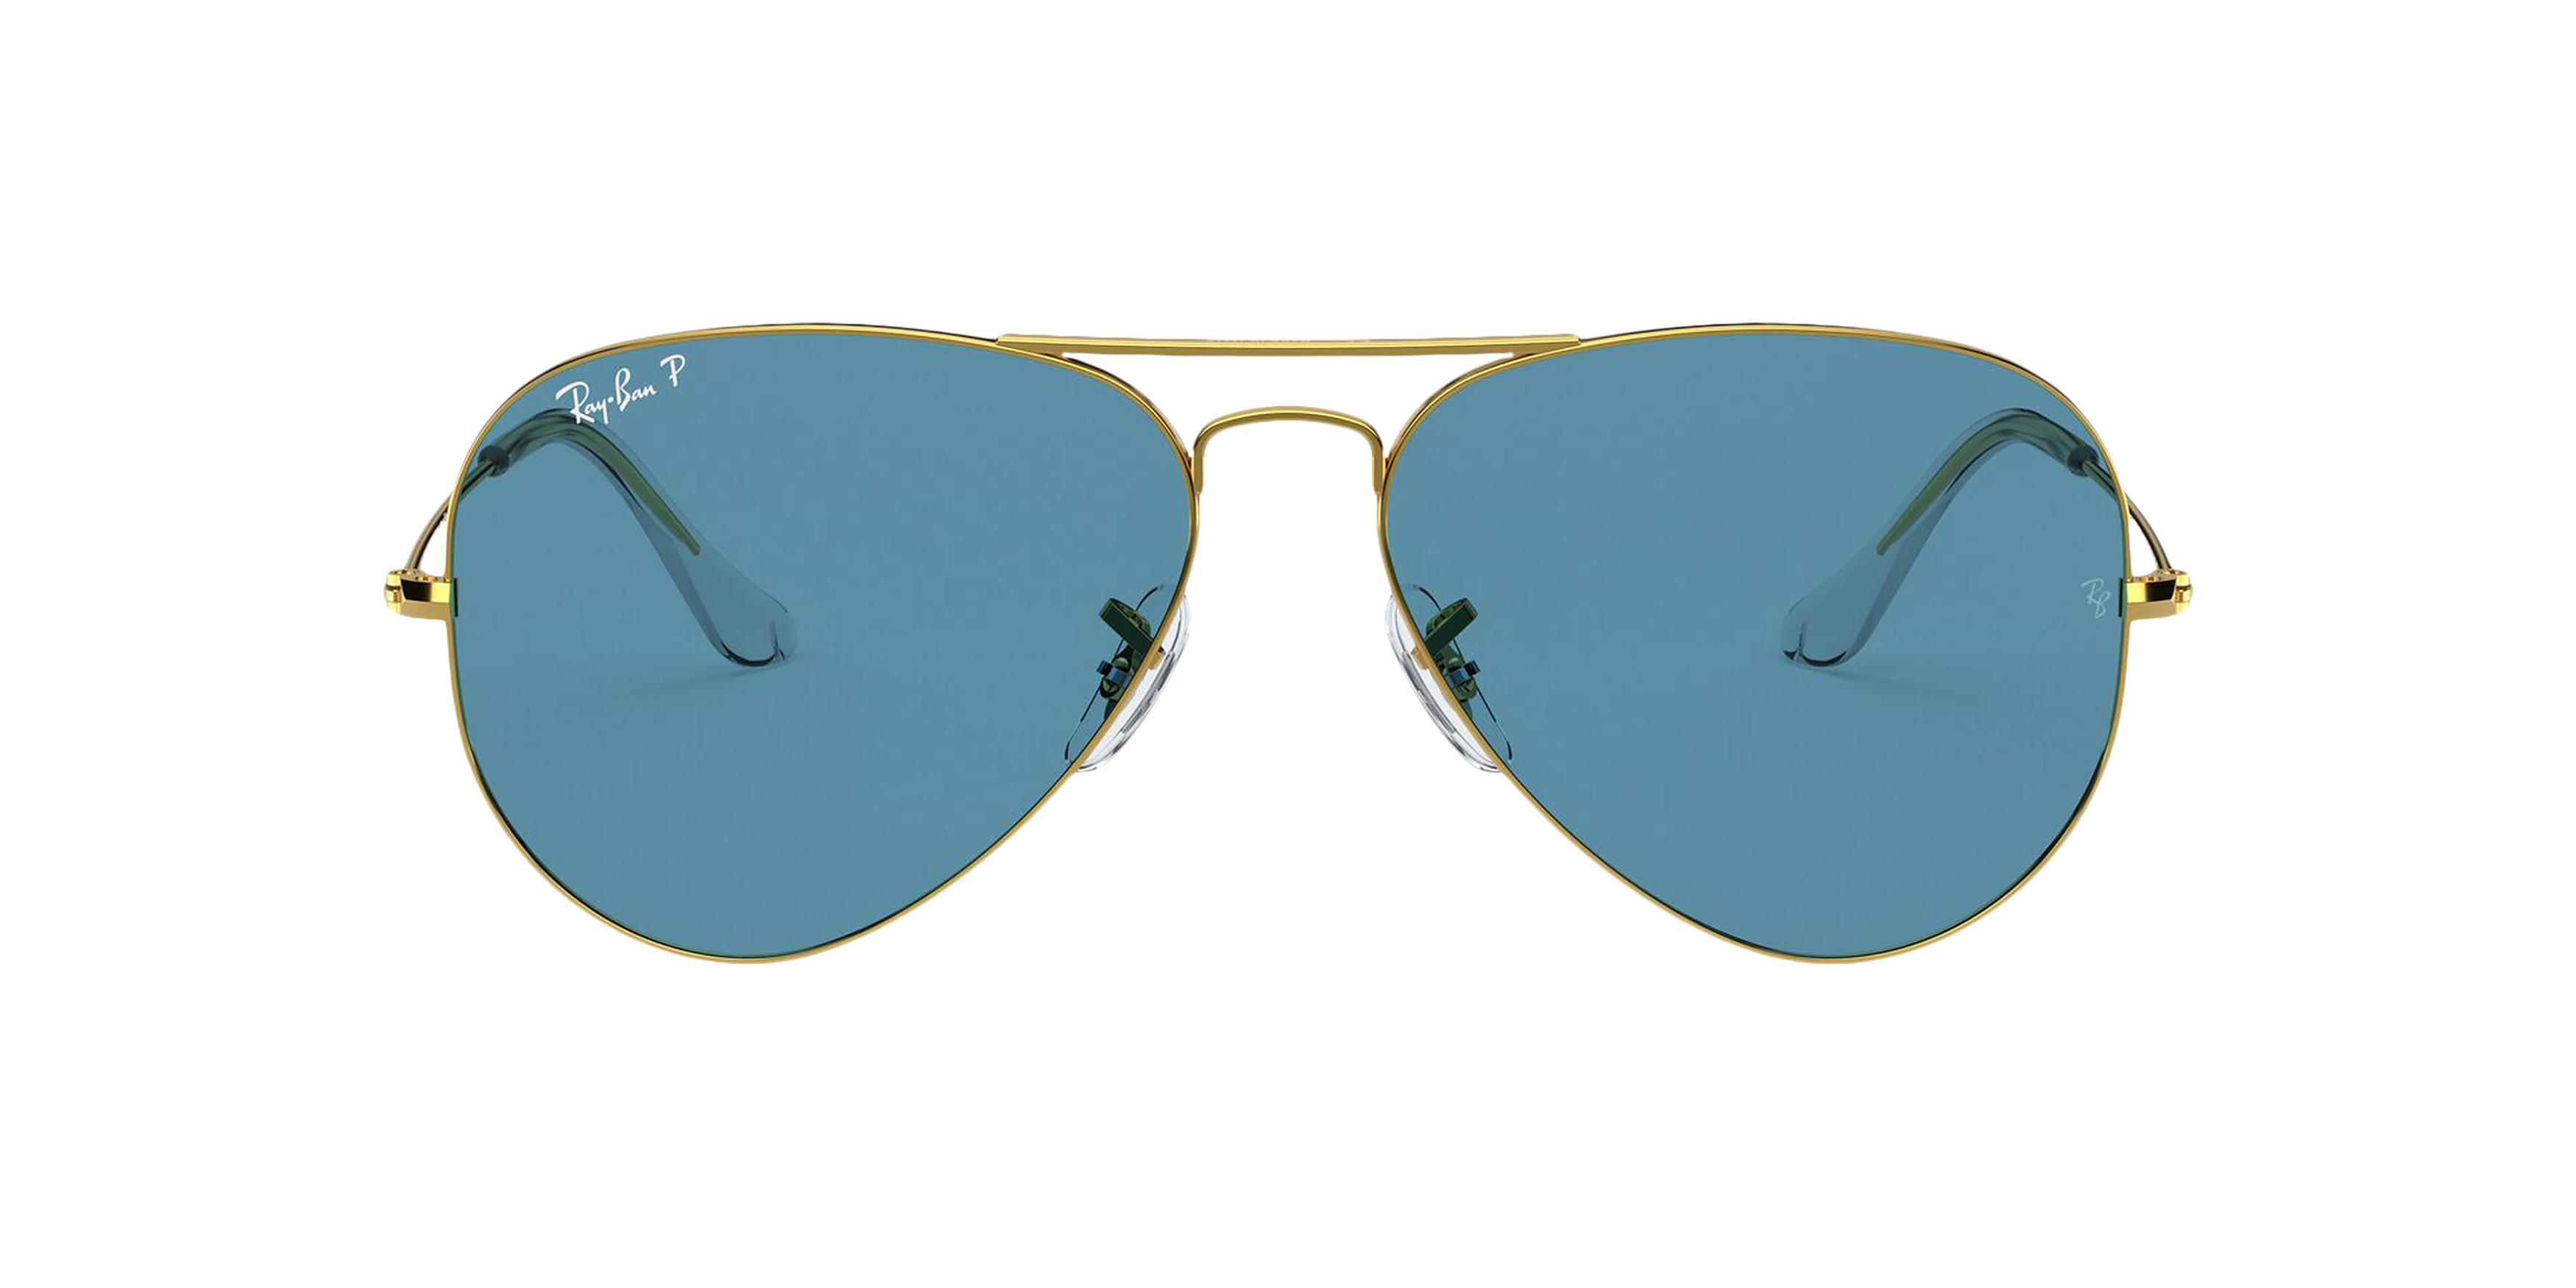 [products.image.front] Ray-Ban Aviator Classic RB3025 9196S2